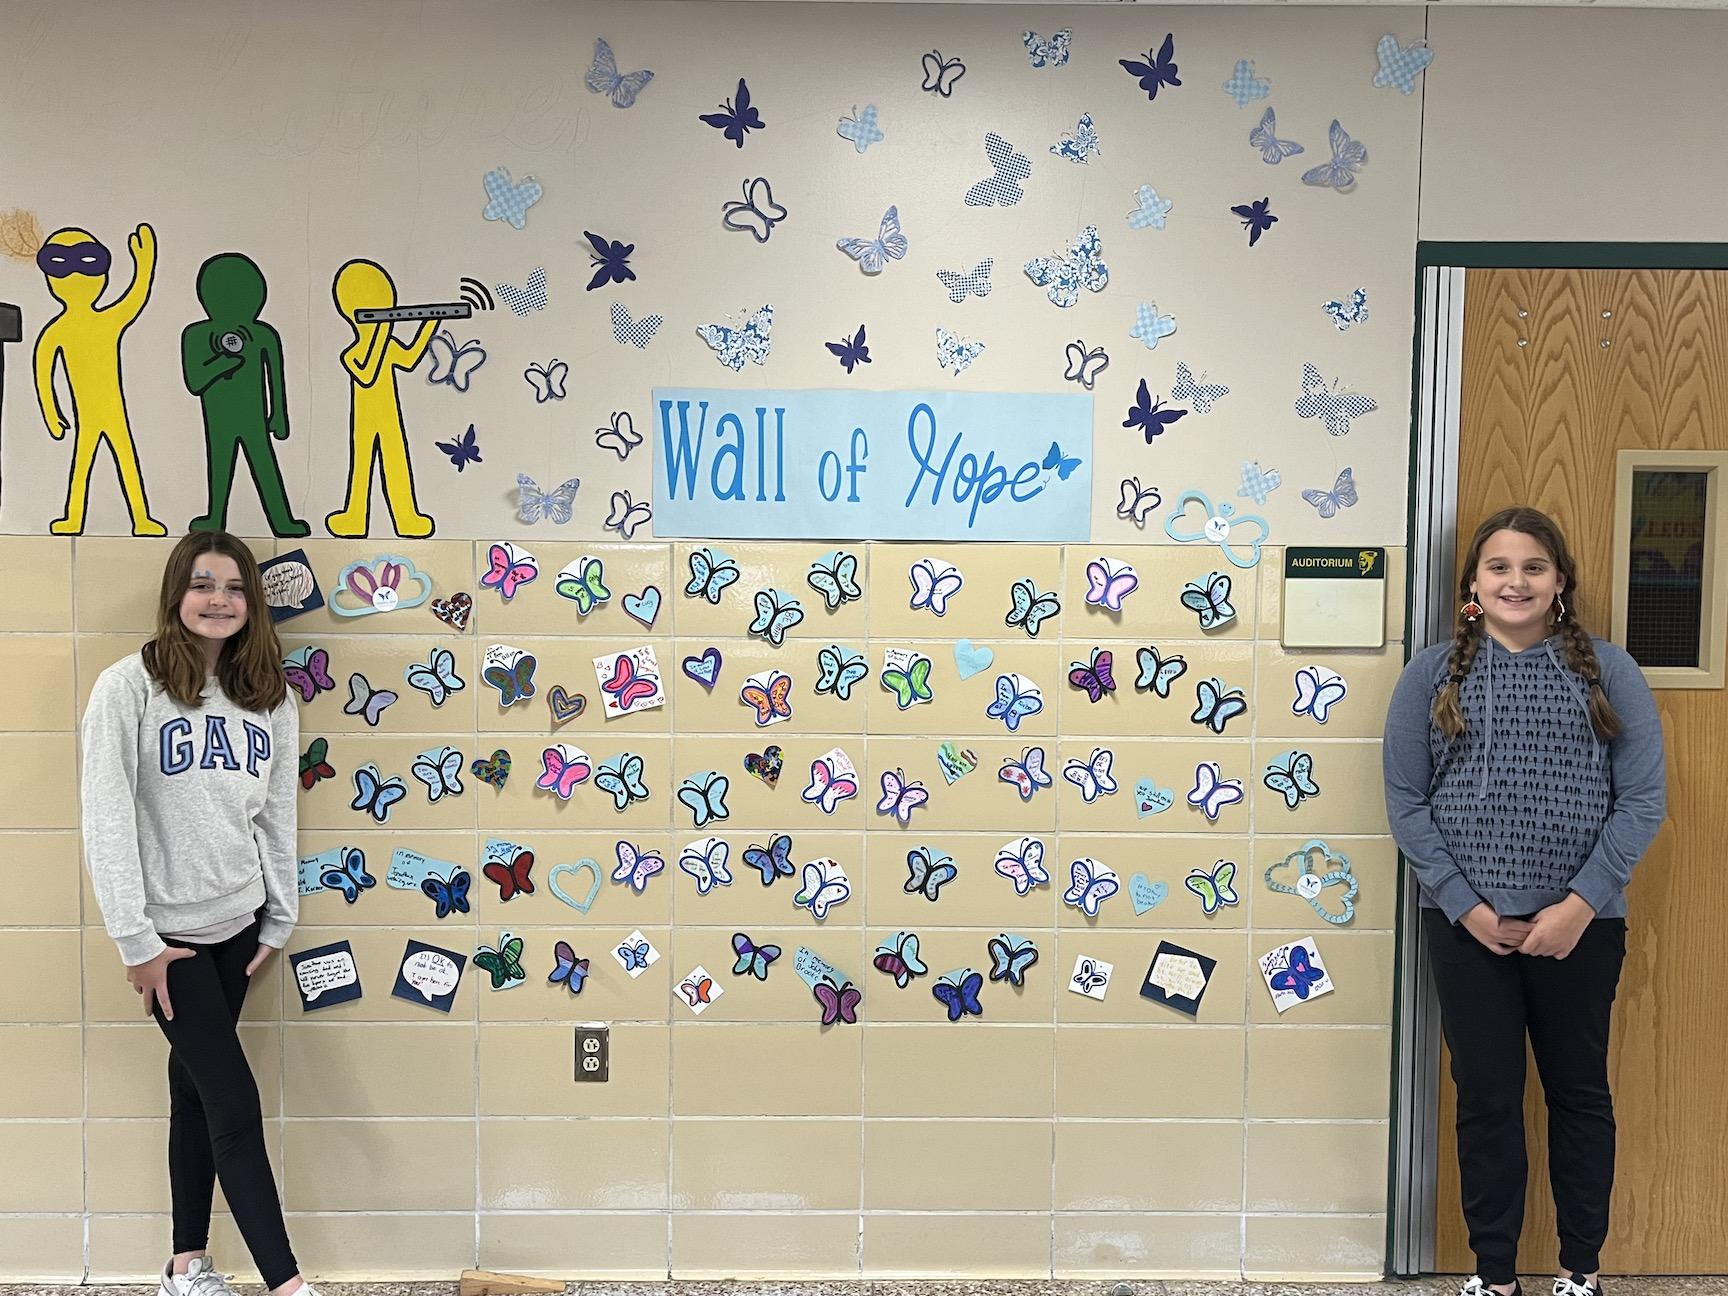 Aurora Hornyak and Liana Revak helped the students create the butterflies and hearts